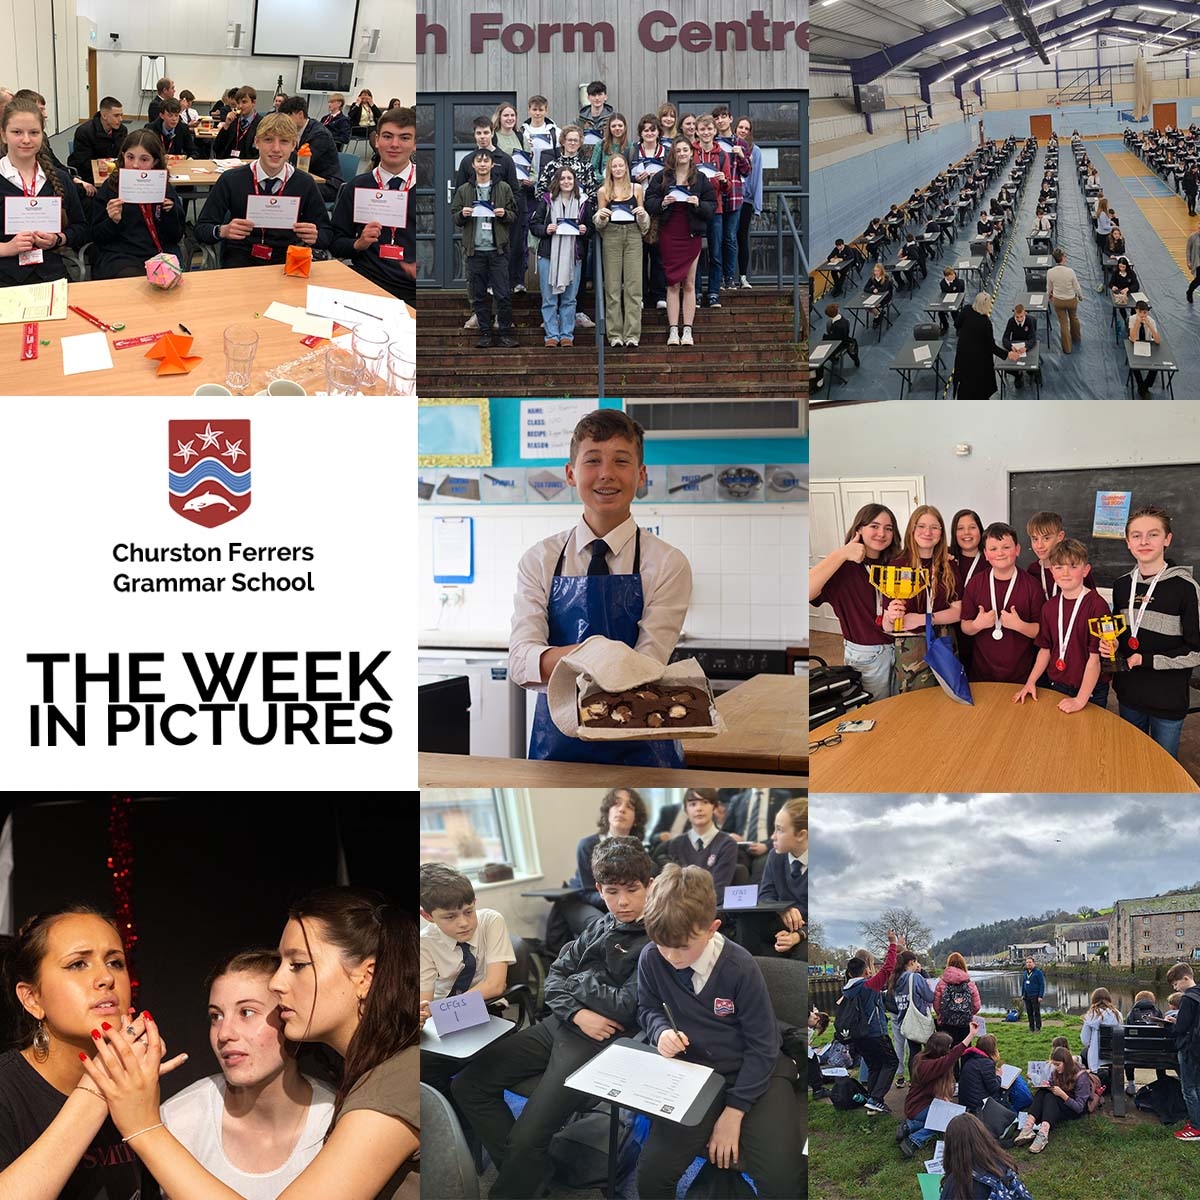 Week in pictures: To find out what we've been up to this week, please head to our Facebook, Instagram or LinkedIn feeds. #CFGS #weekinpictures